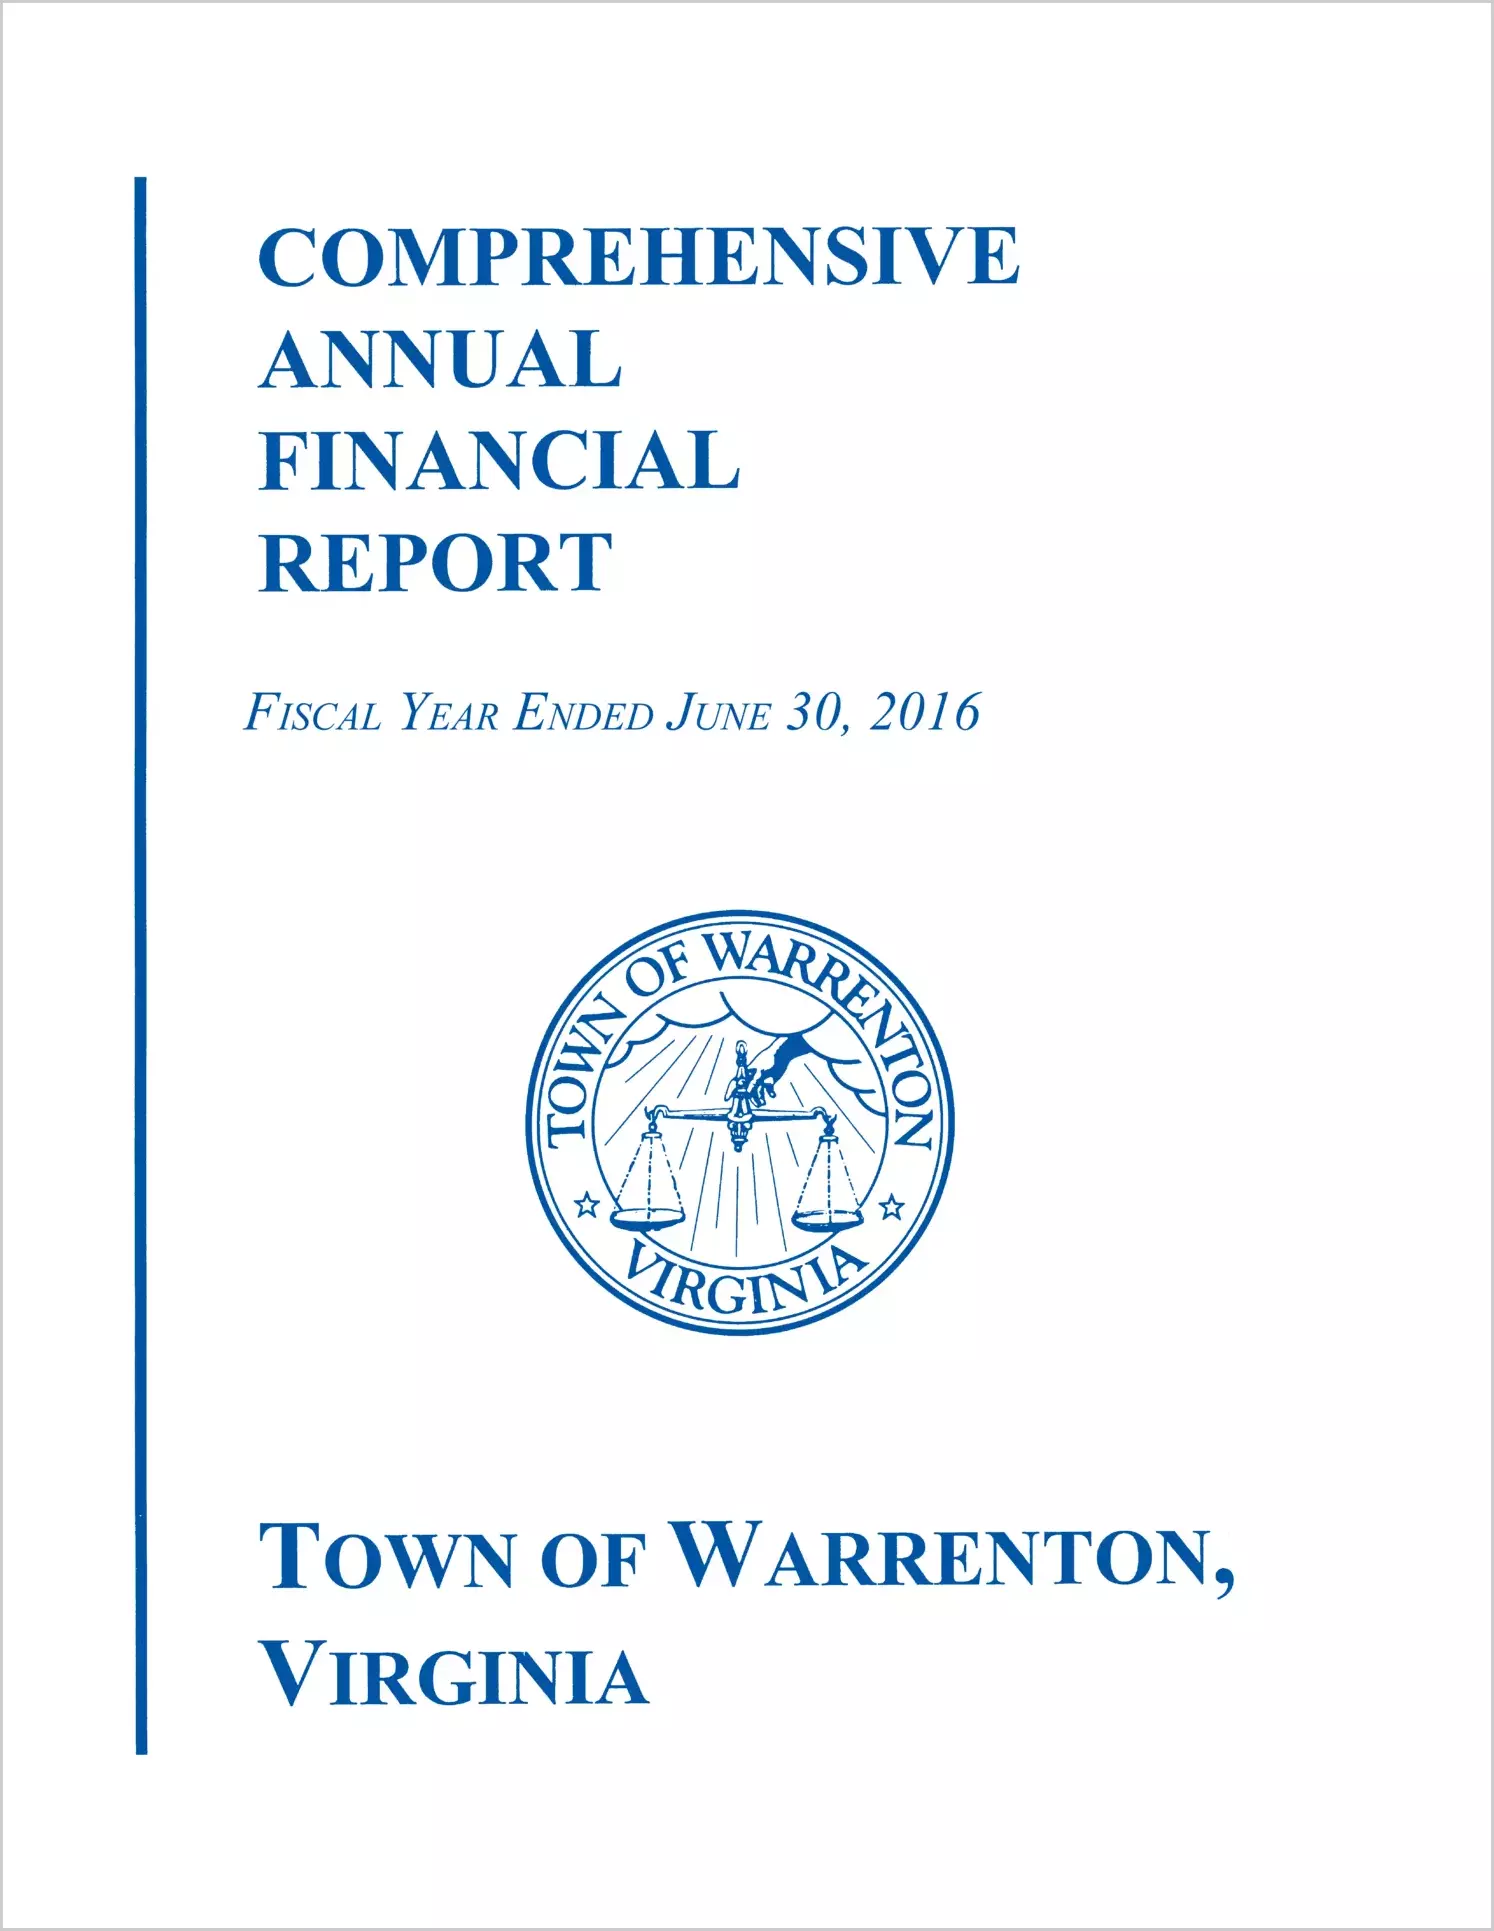 2016 Annual Financial Report for Town of Warrenton